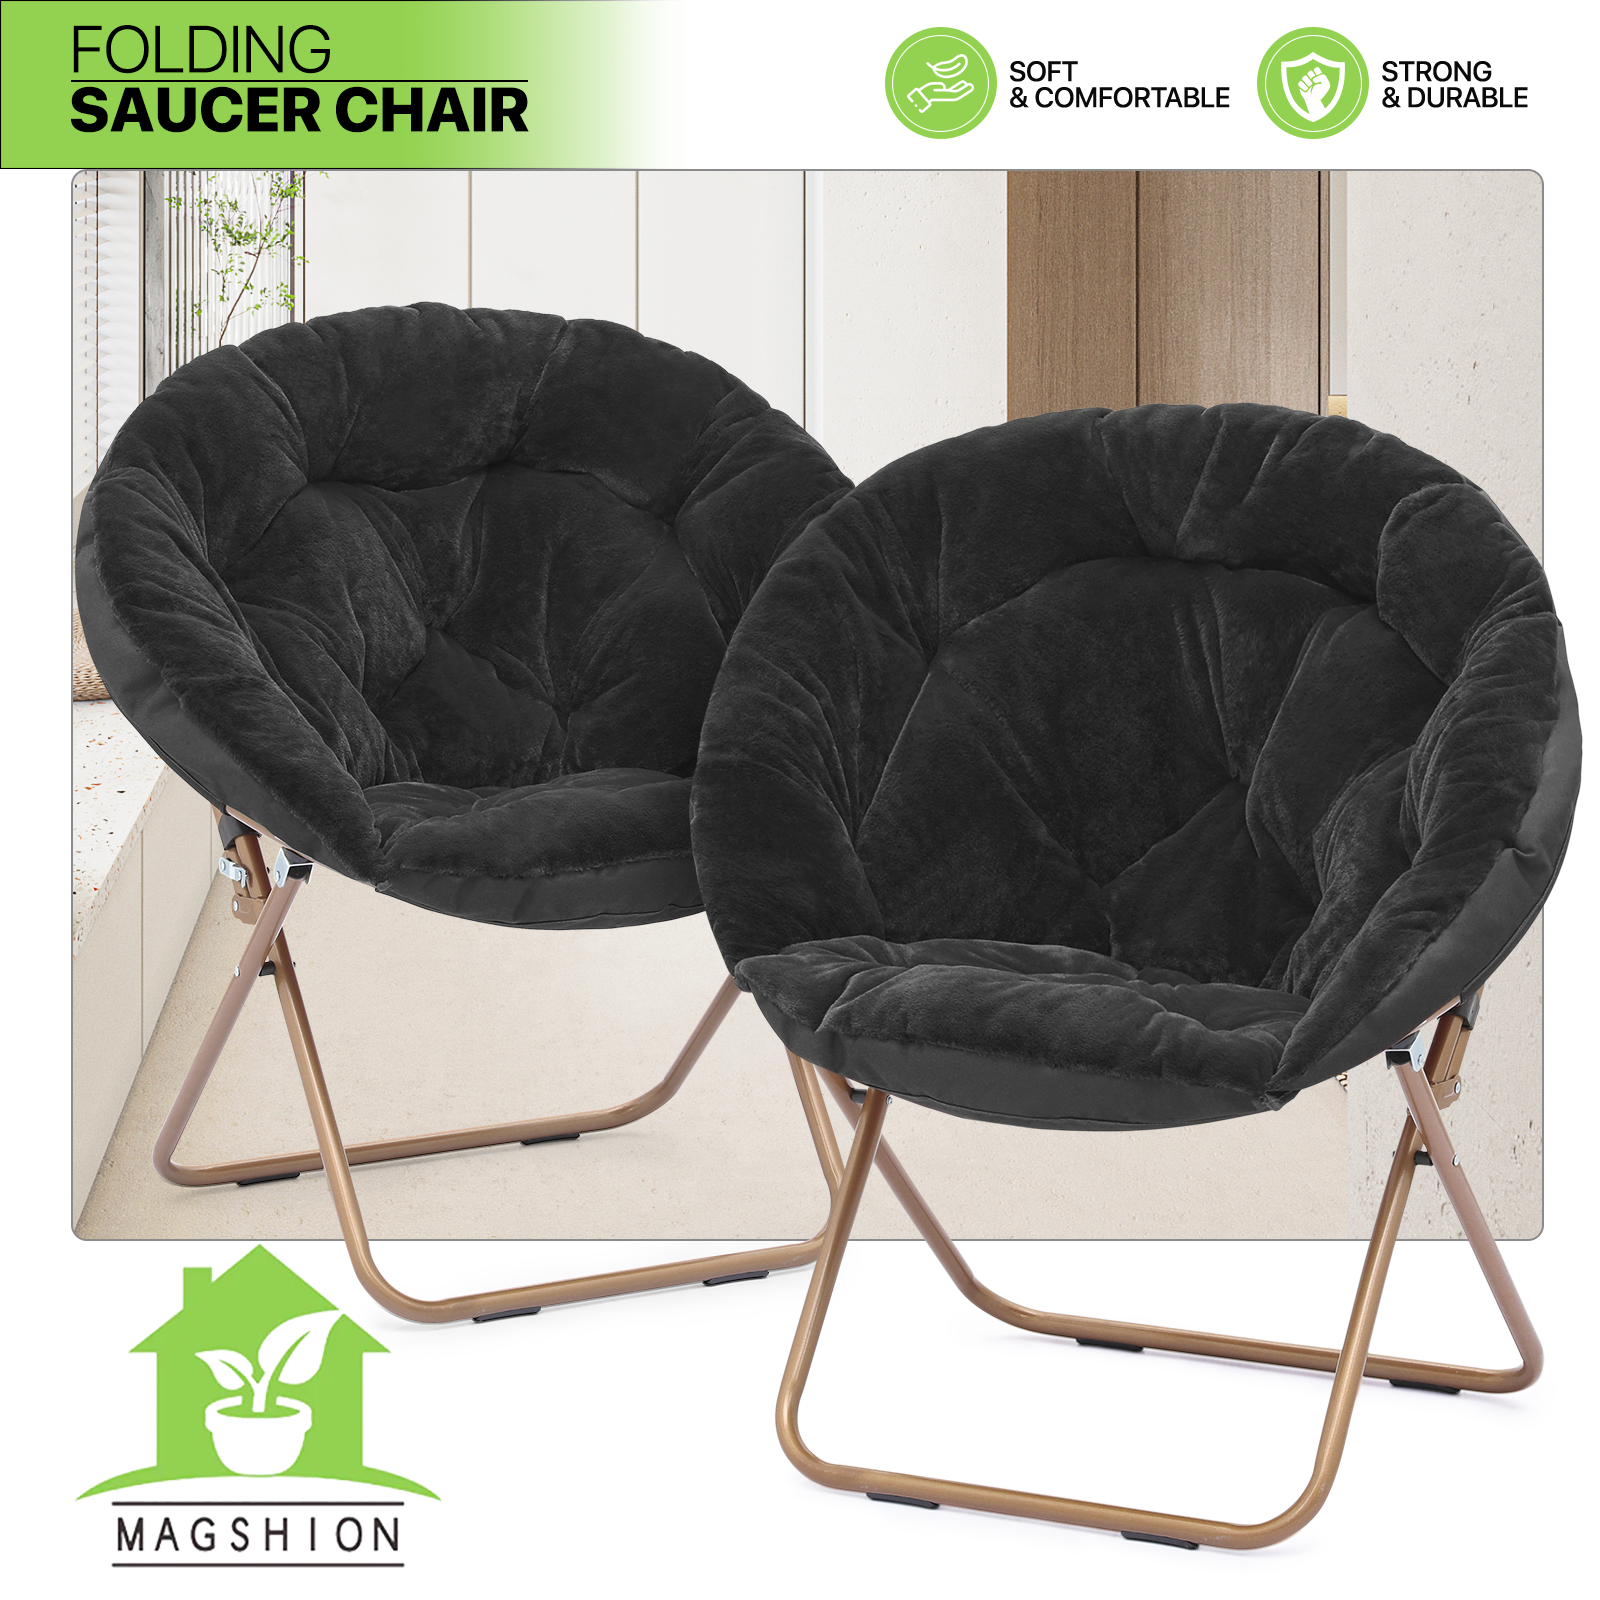 Magshion Set of 2 Saucer Chair Soft Faux Fur Folding Accent Chair, Lounge Lazy Chair Moon Chair Seat with Metal Frame for Bedroom Living Room, Black - image 2 of 10